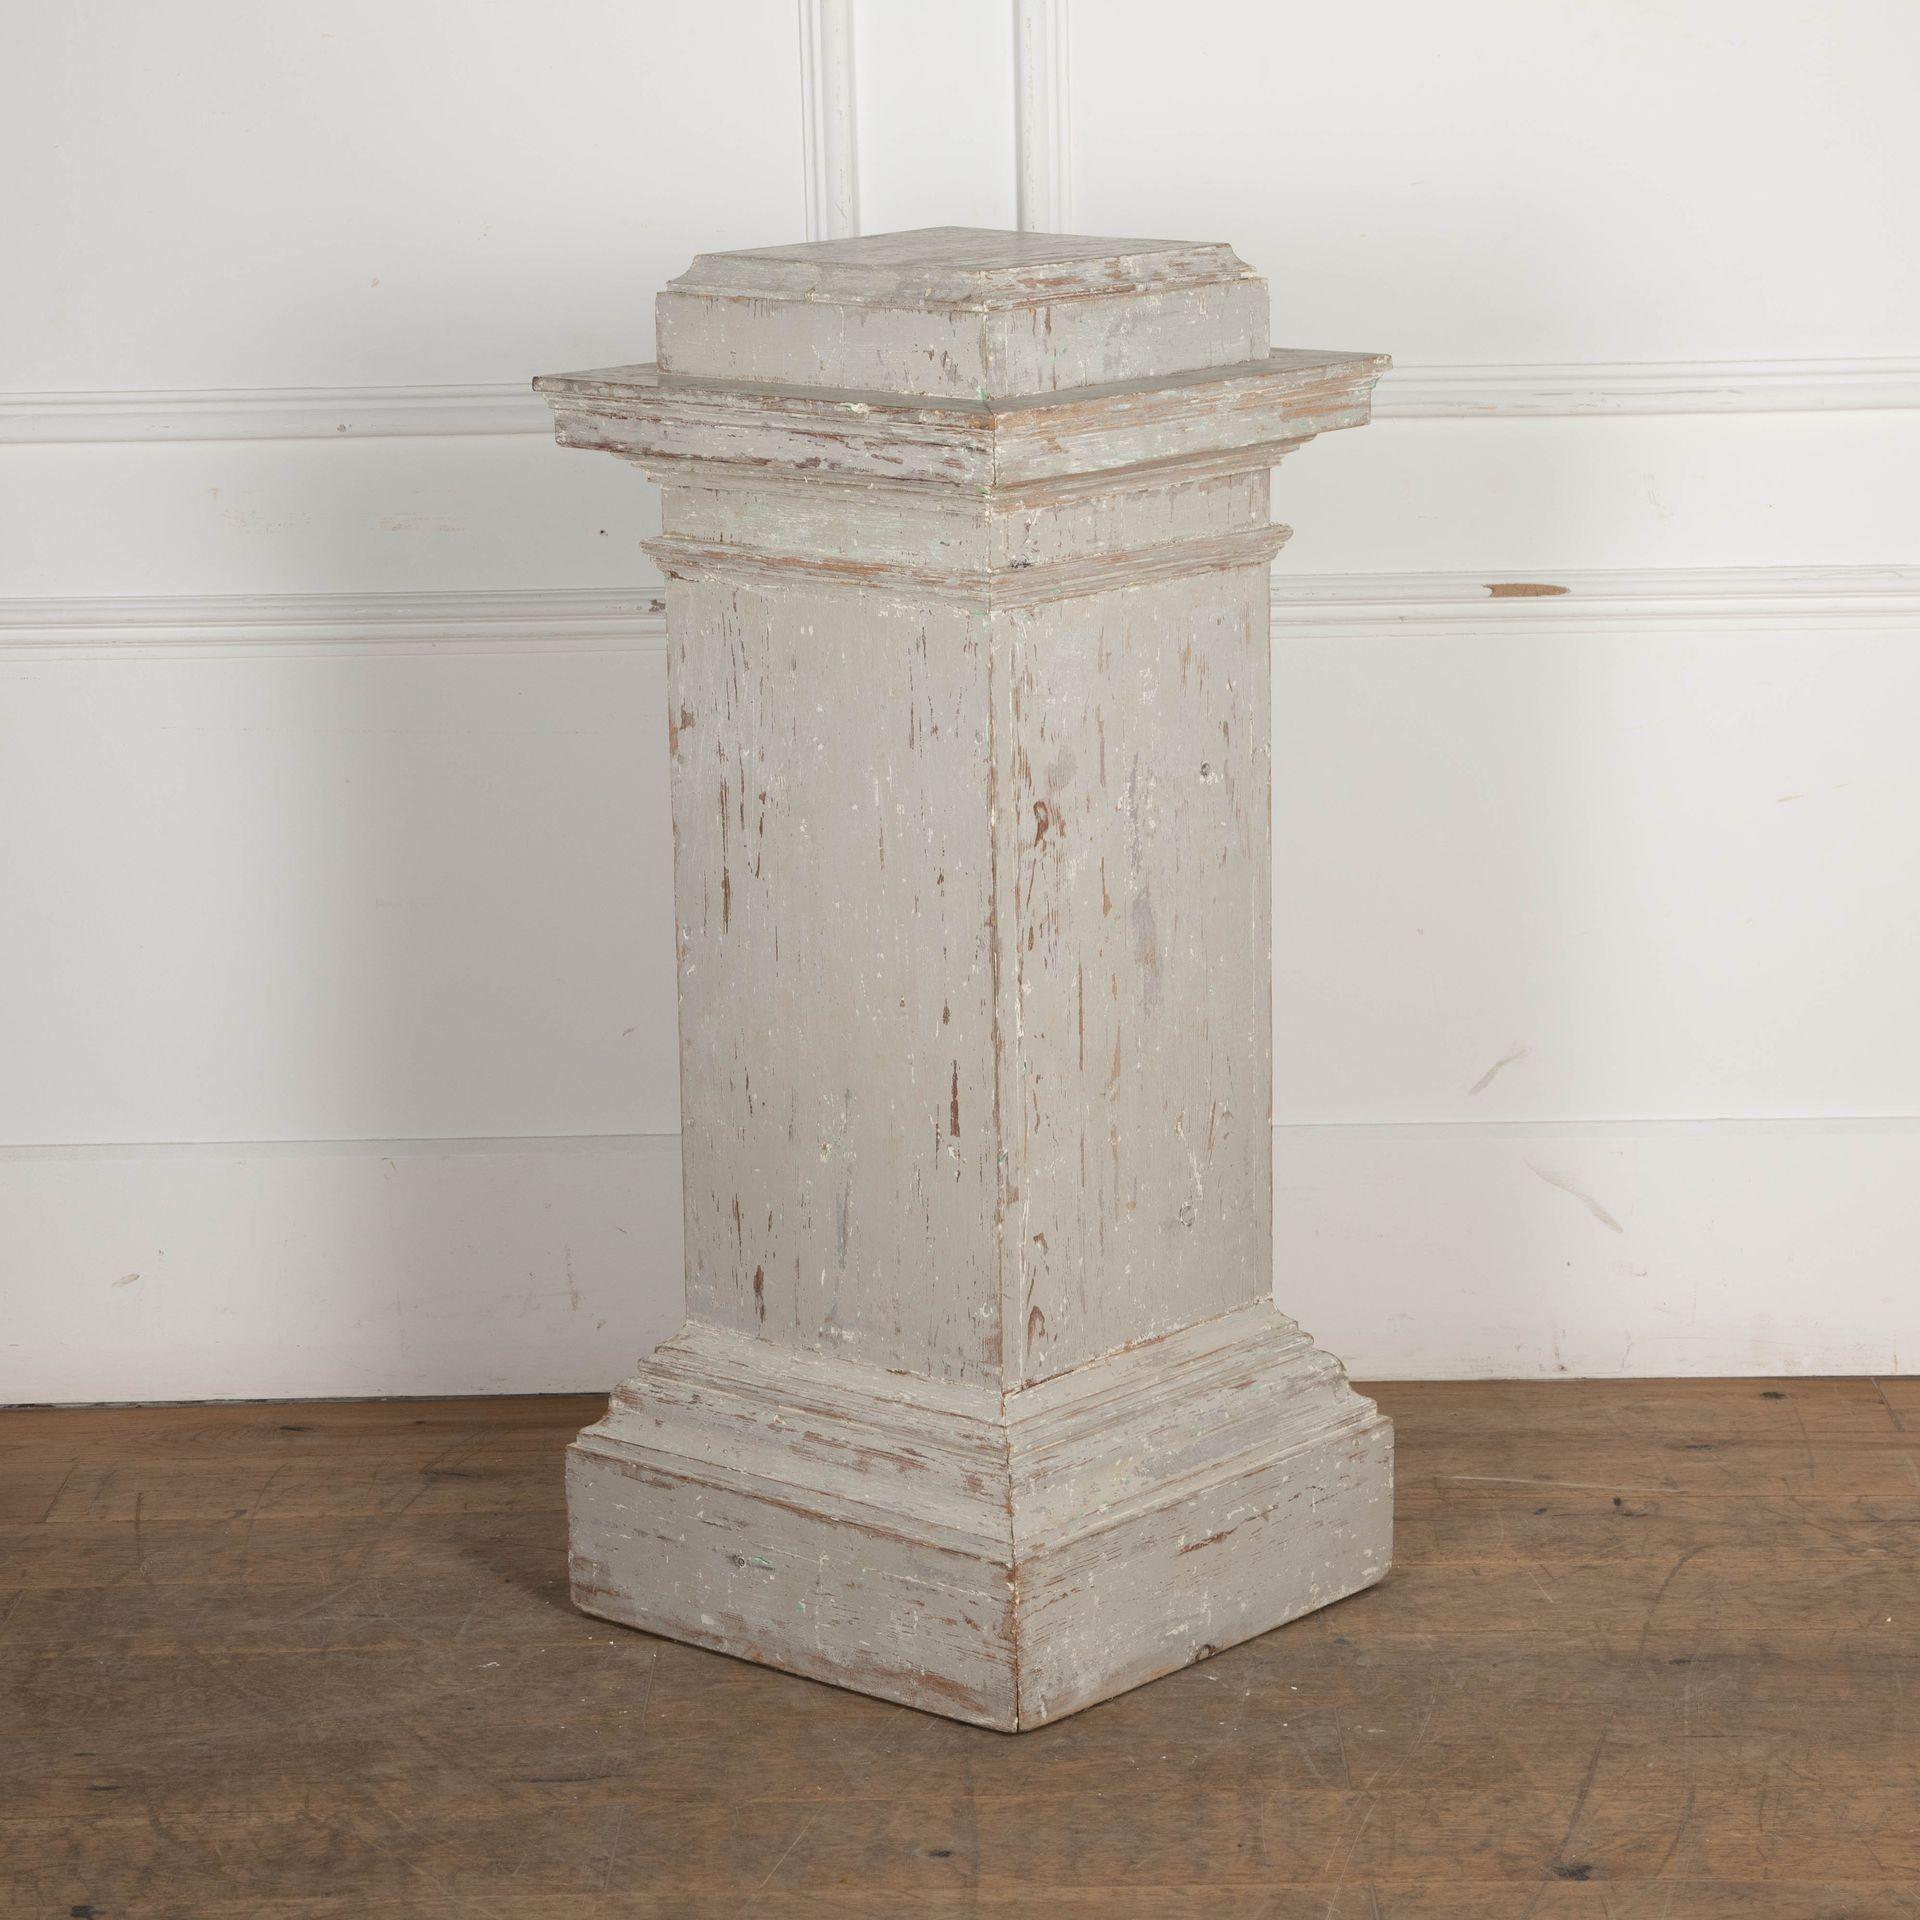 Early 19th Century painted pedestal/column from Northern Sweden.
Dry scraped to secondary paint.